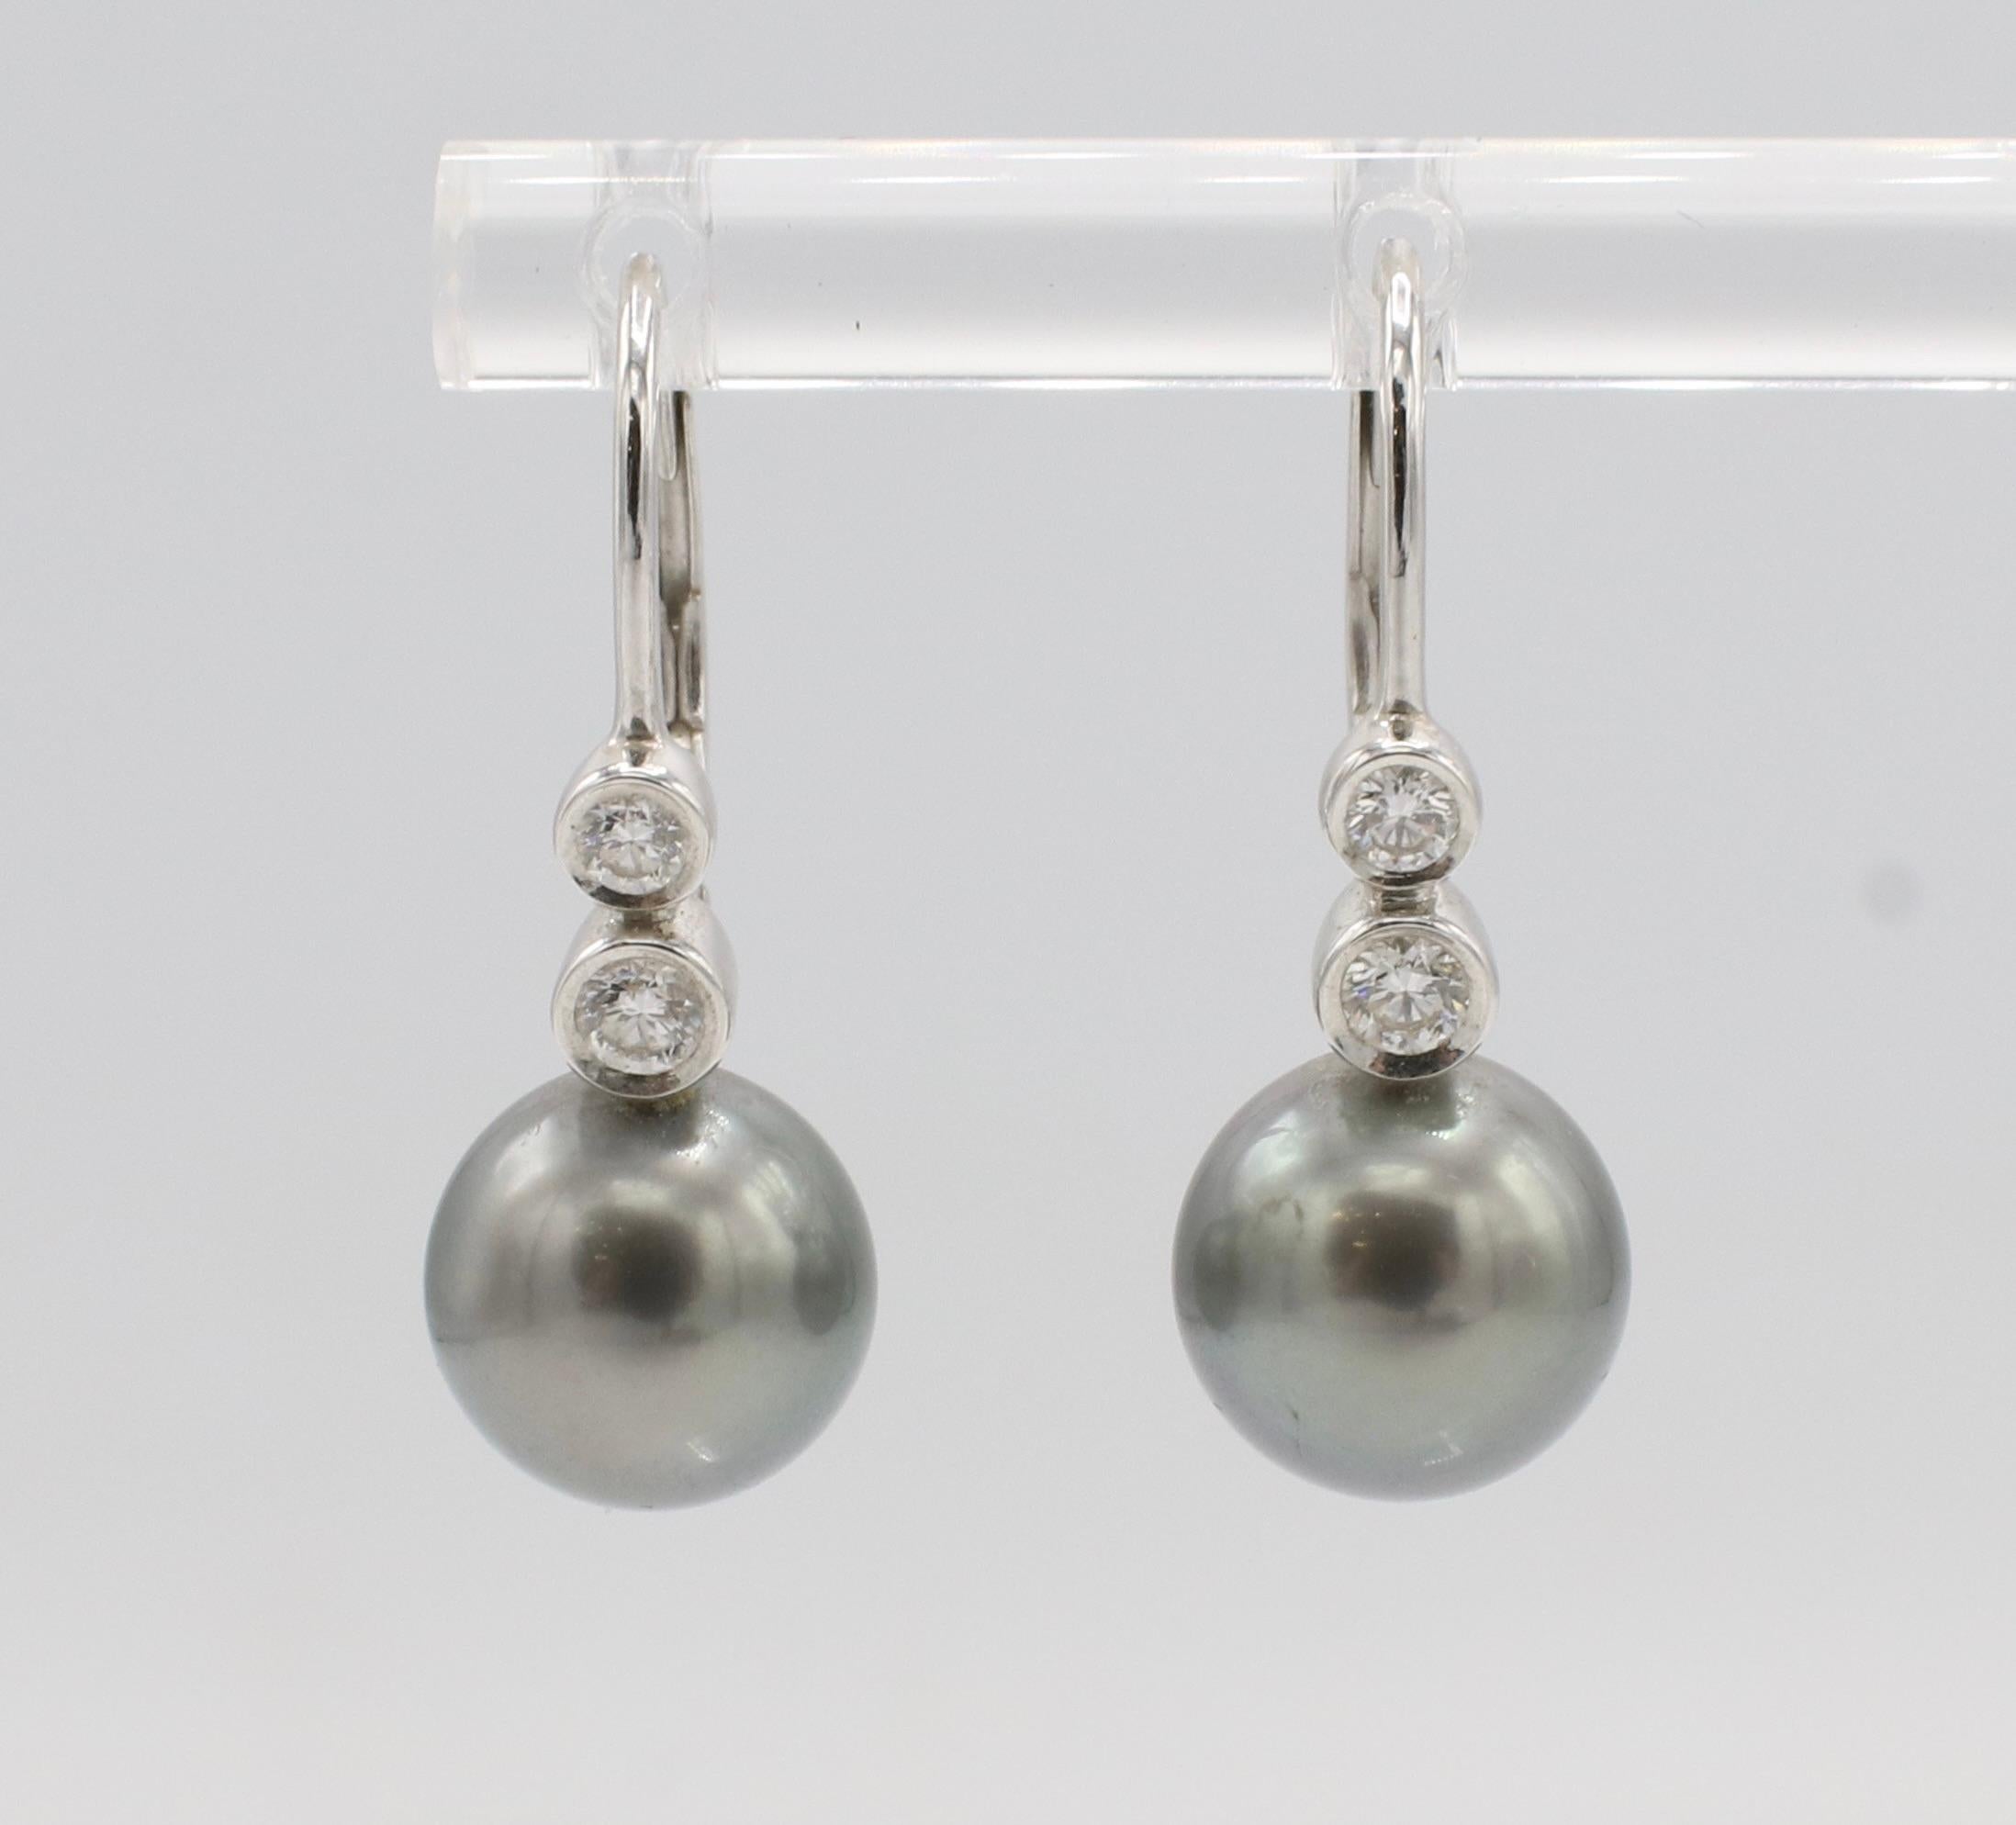 Mikimoto Black South Sea Pearl & Natural Diamond 18K White Gold Drop Earrings
Metal: 18k white gold
Weight: 3.7 grams
Diamonds: Approx. 0.22 CTW round F VS natural diamonds
Pearls: 9mm, round black South Sea cultured pearls
Drop: 23mm
